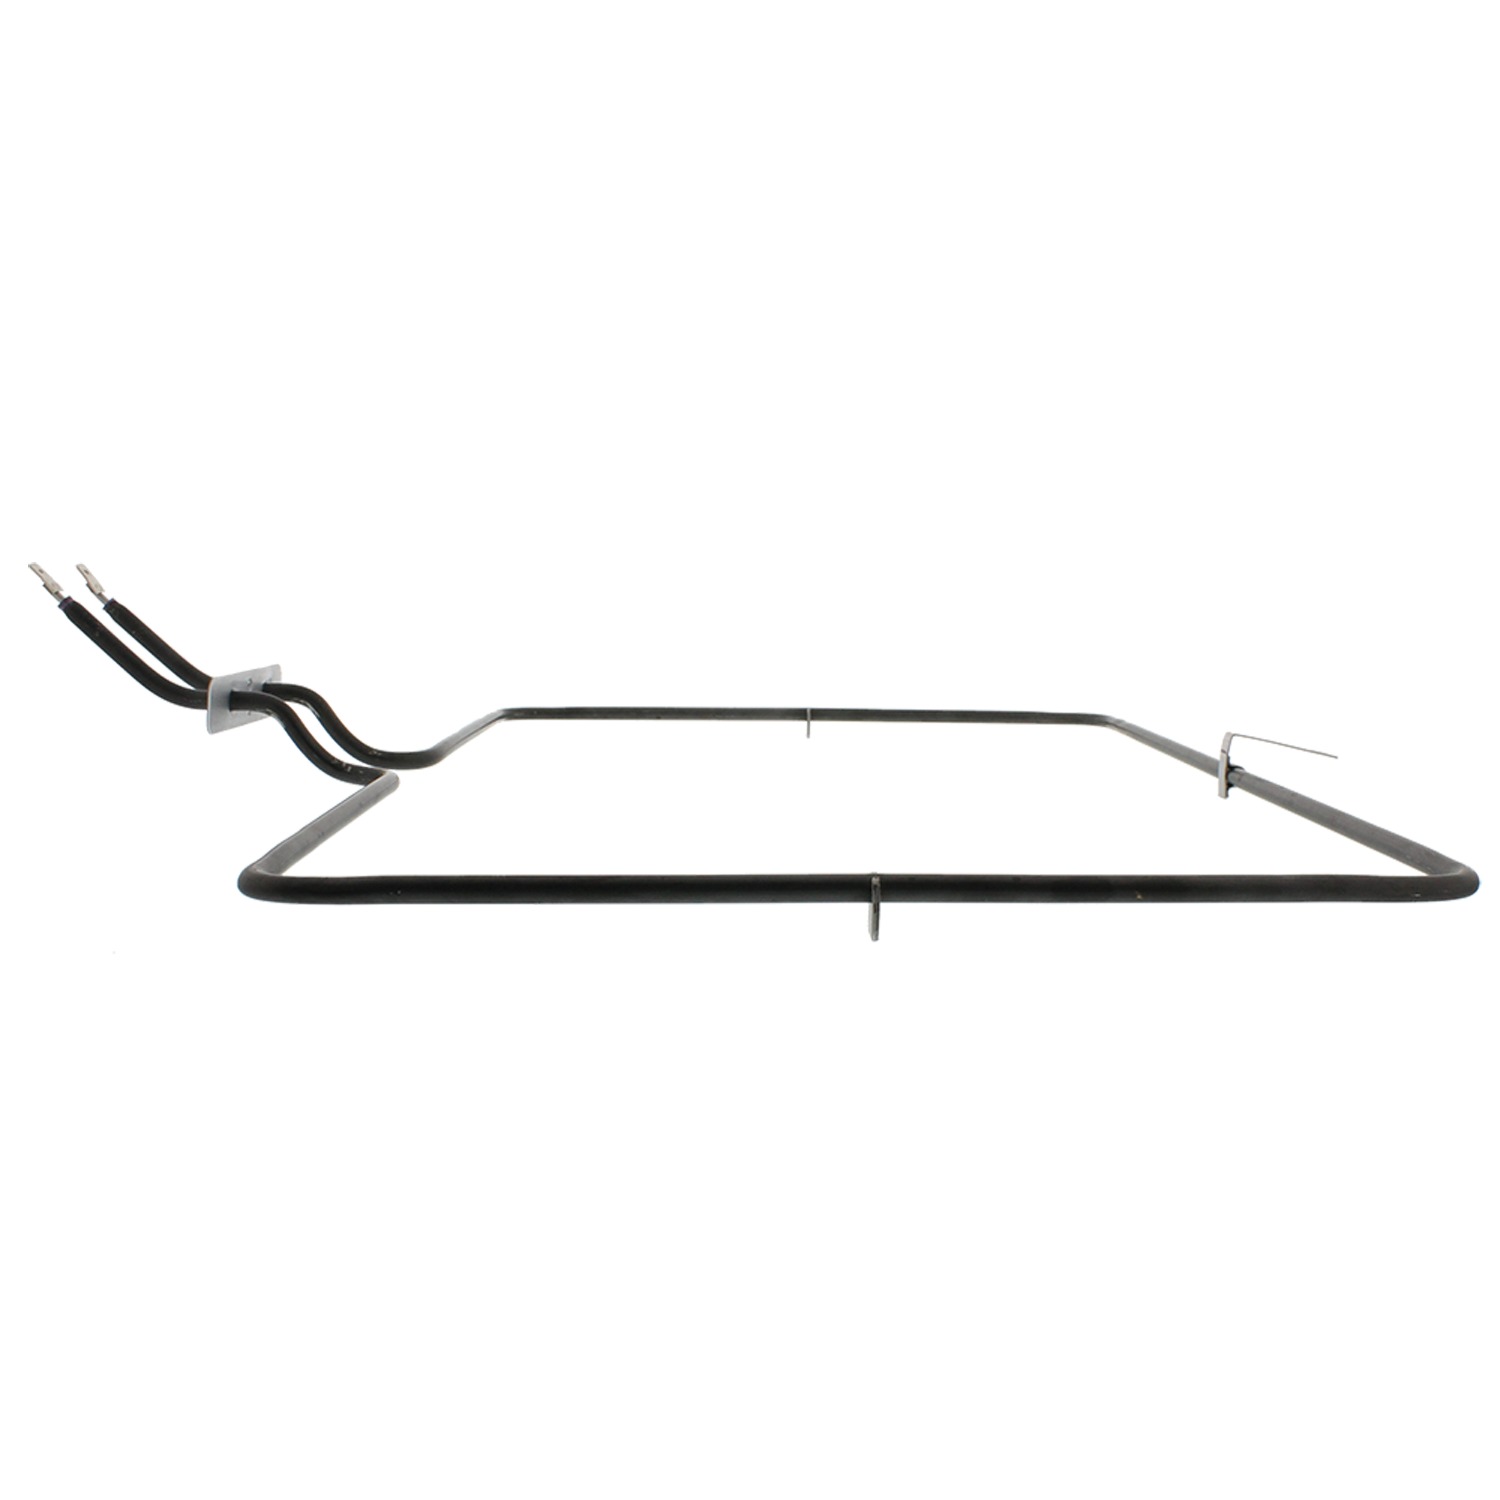 Exact Replacement Parts W10779716 Replacement Oven Bake Element - image 3 of 8